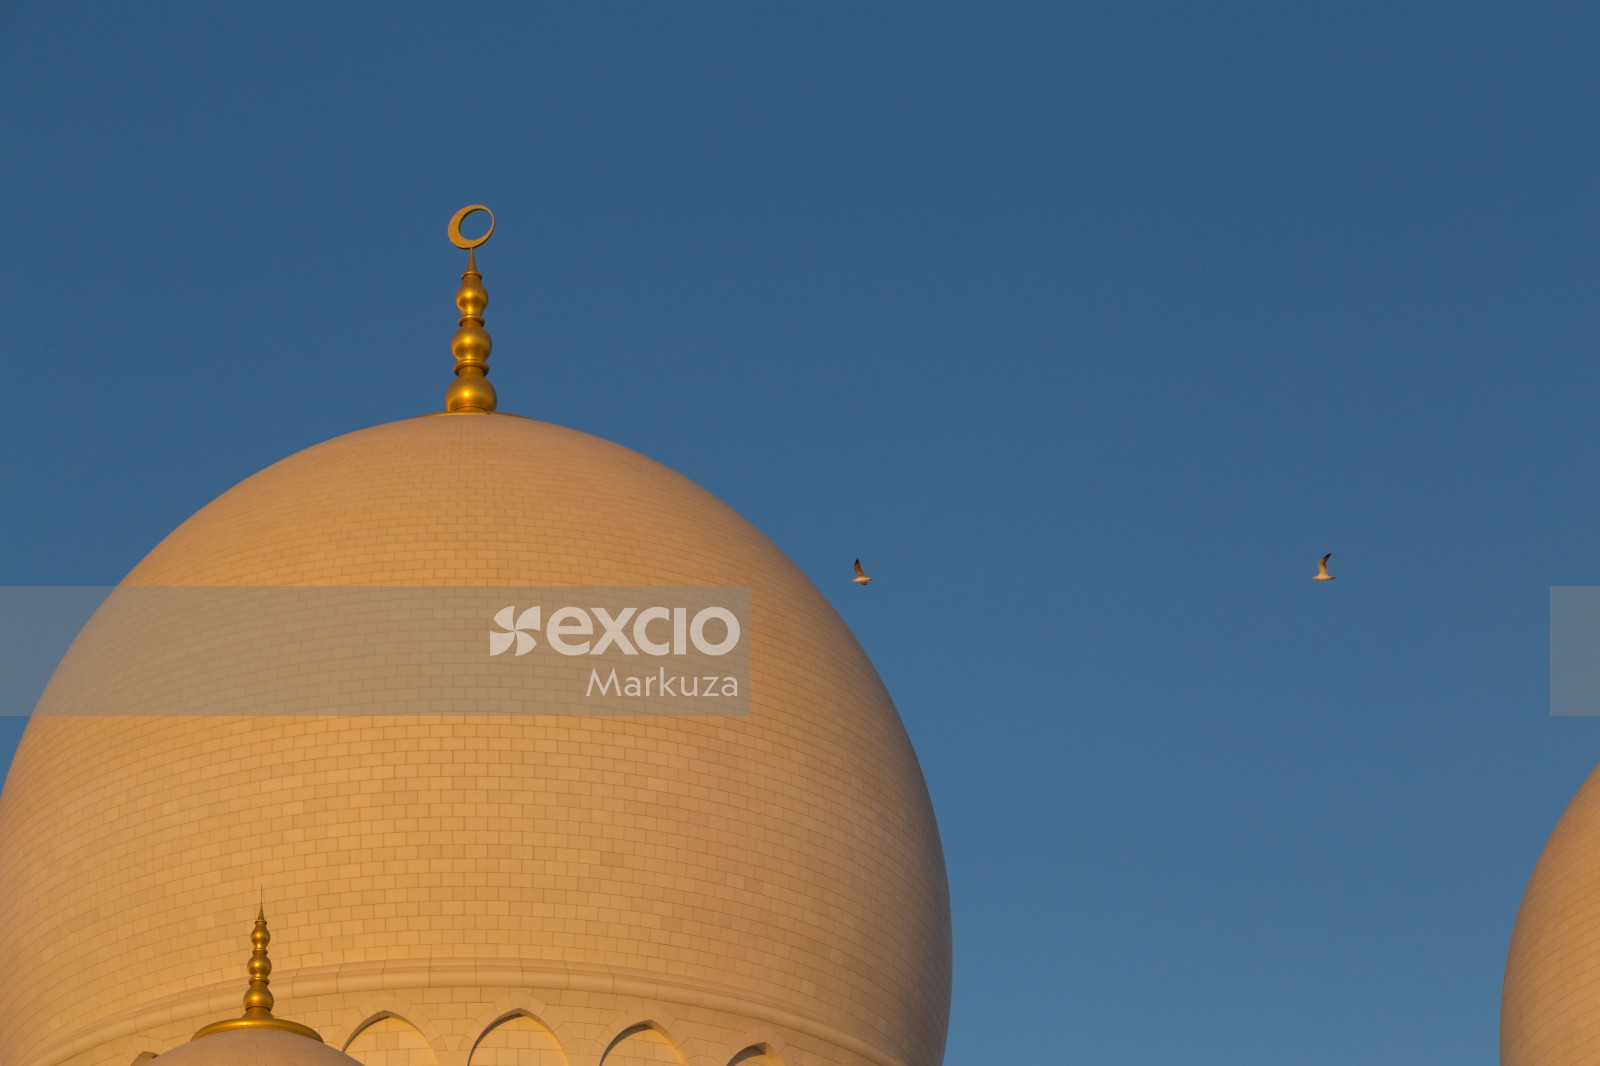 Golden hour and the grand Mosque's dome